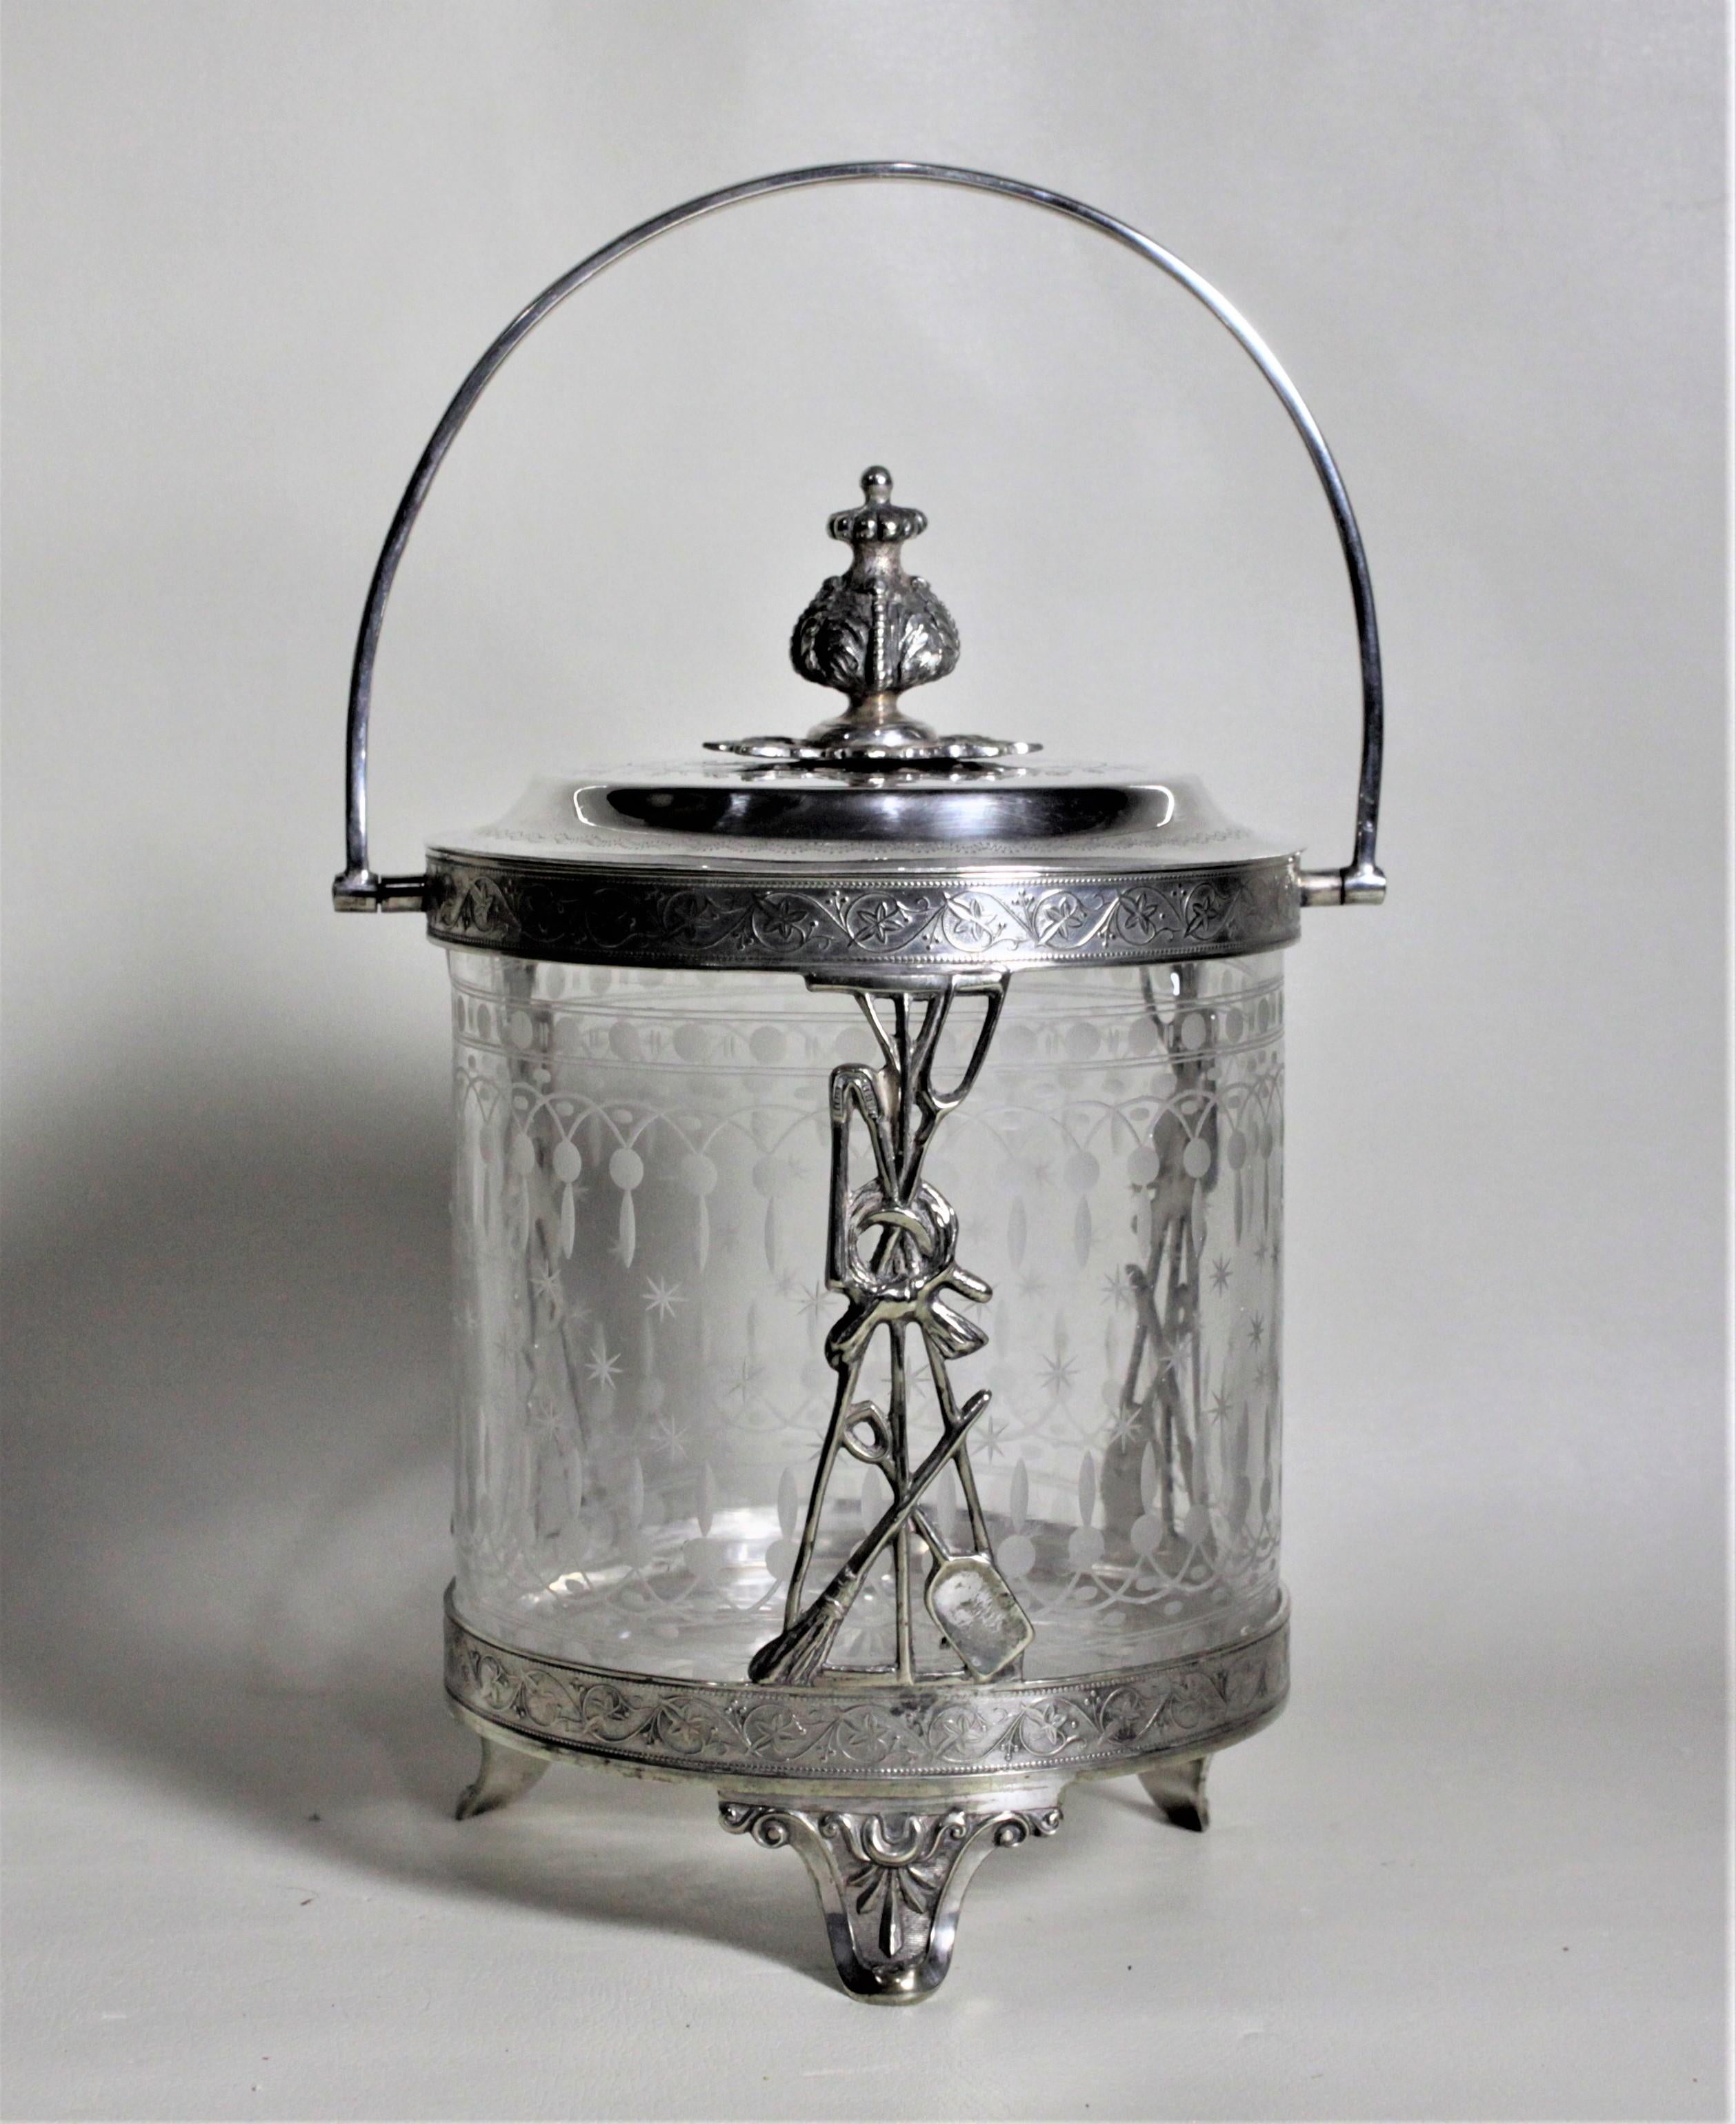 This unique biscuit barrel or cookie jar is unmarked, but believed to date to the Edwardian period and originate from England. The frame of this biscuit barrel is ornately engraved with a scroll and floral motif around both the upper and lower bands